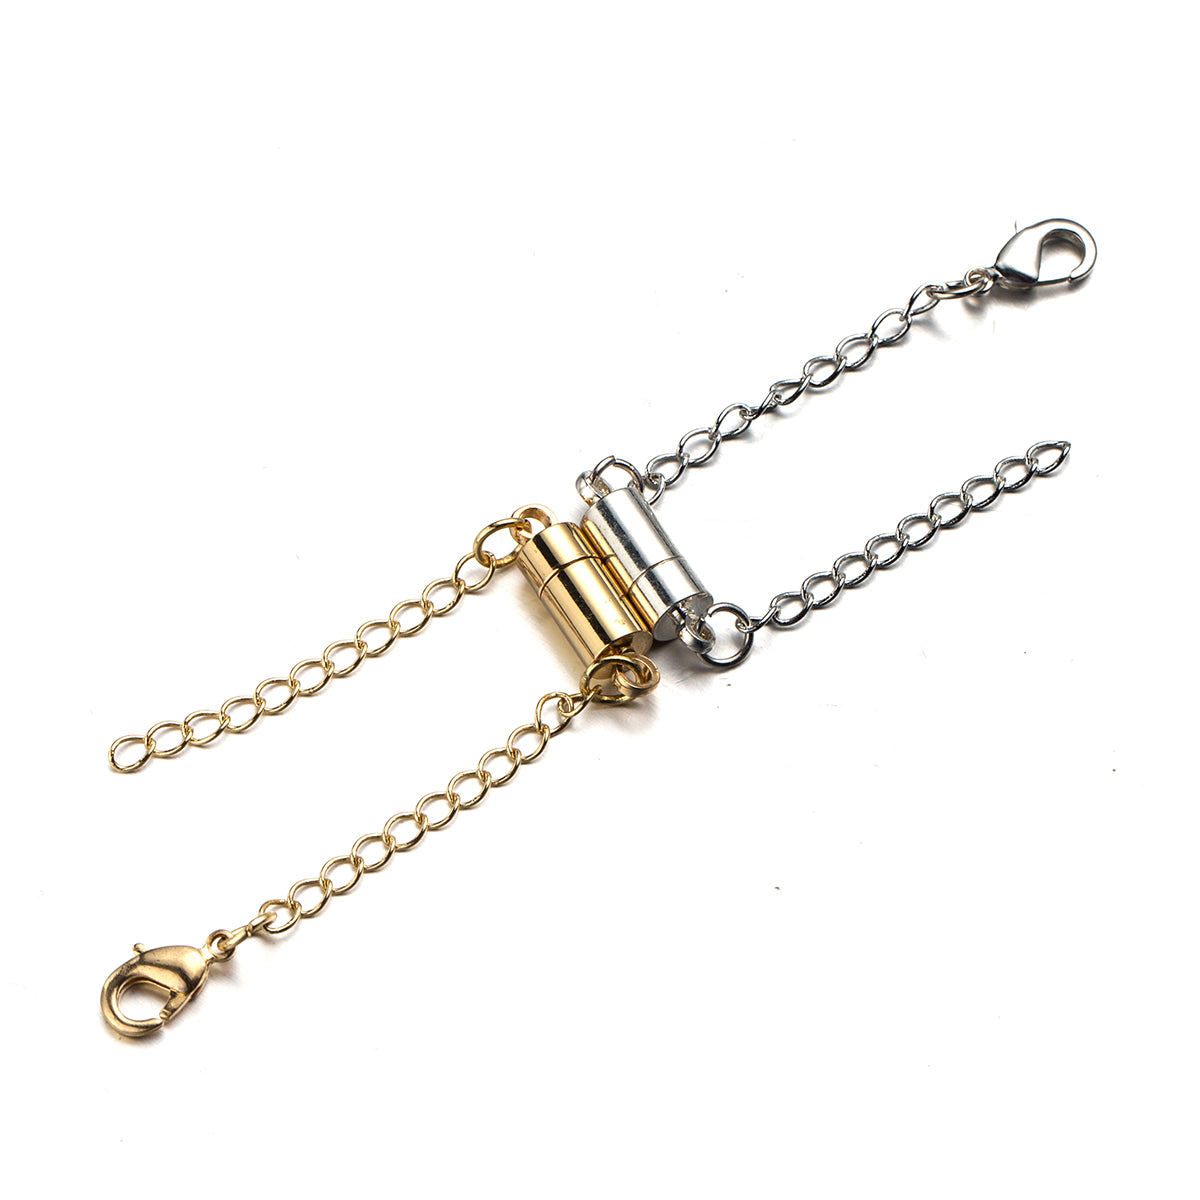 Gold Magnetic Jewelry Safety Clasp